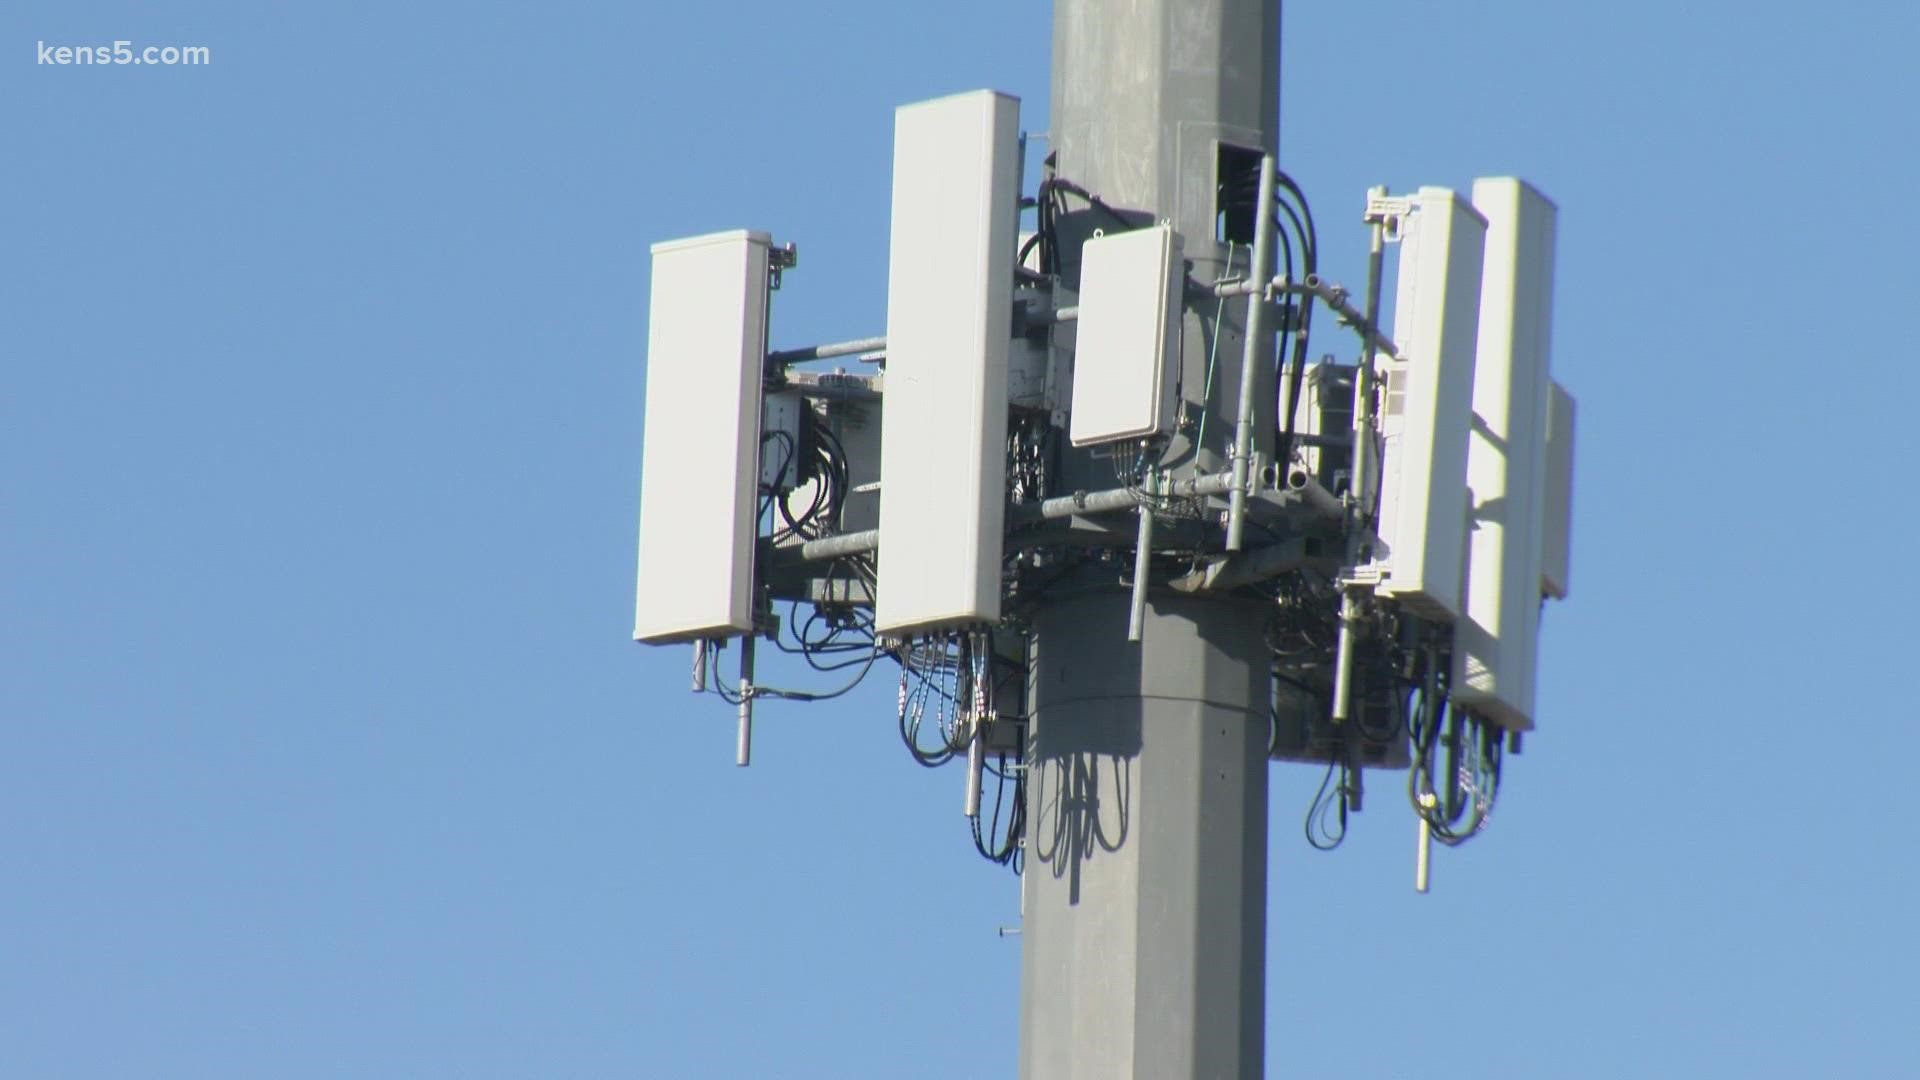 To make room for 5G, Cell service providers will soon drop the 3G network. Thousands of emergency devices still rely on the older network to communicate.